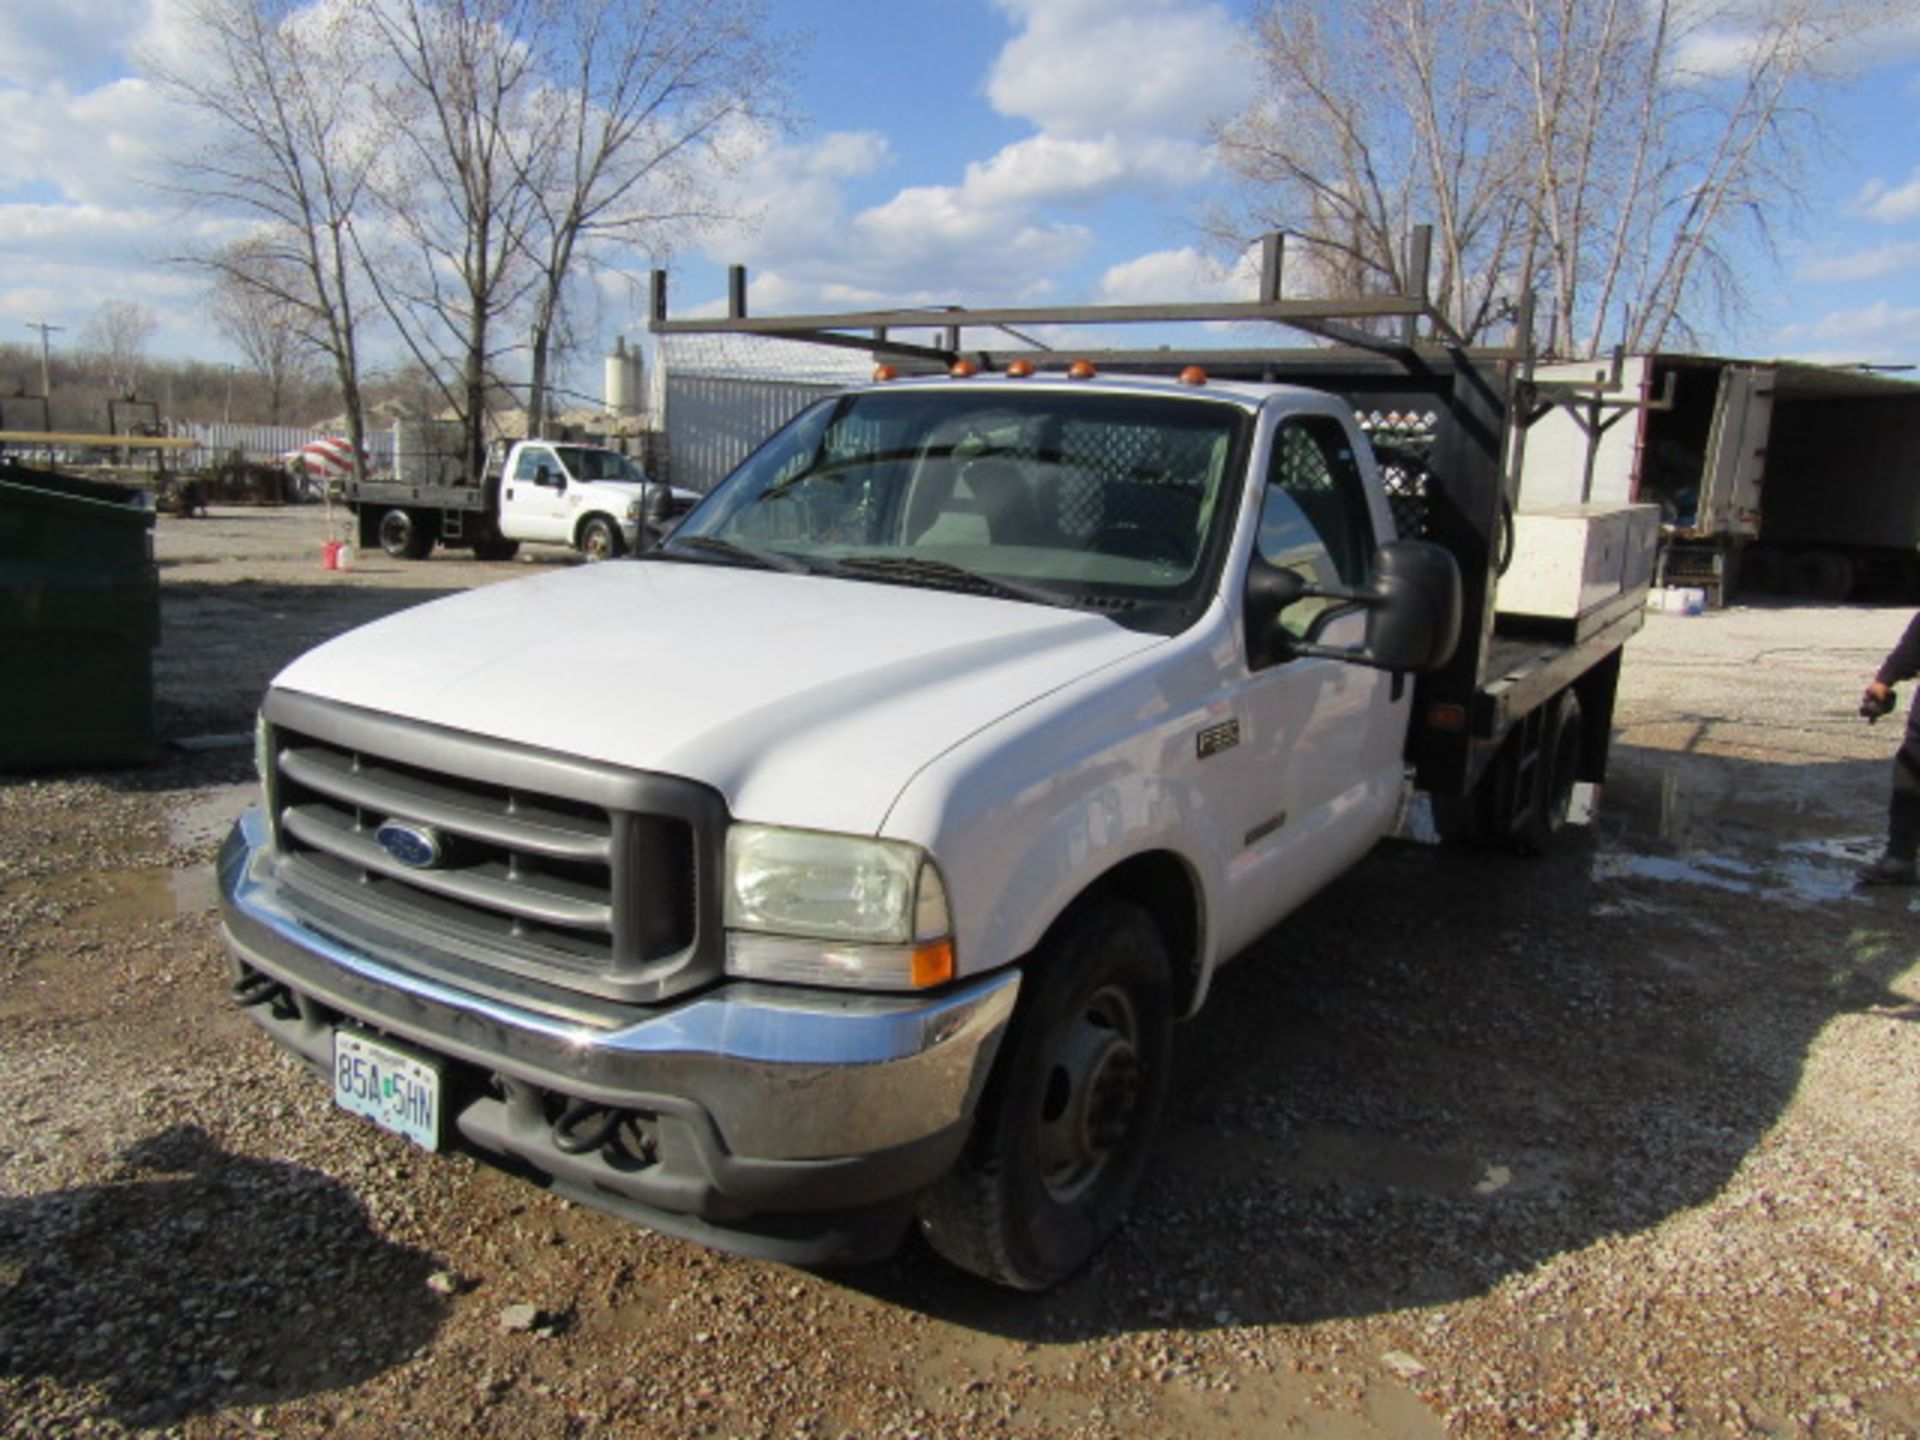 2004 Ford F350 Super Duty Utility Truck, Vin# 1FDWF36P34EA10279, 228,108 miles, Automatic, Power